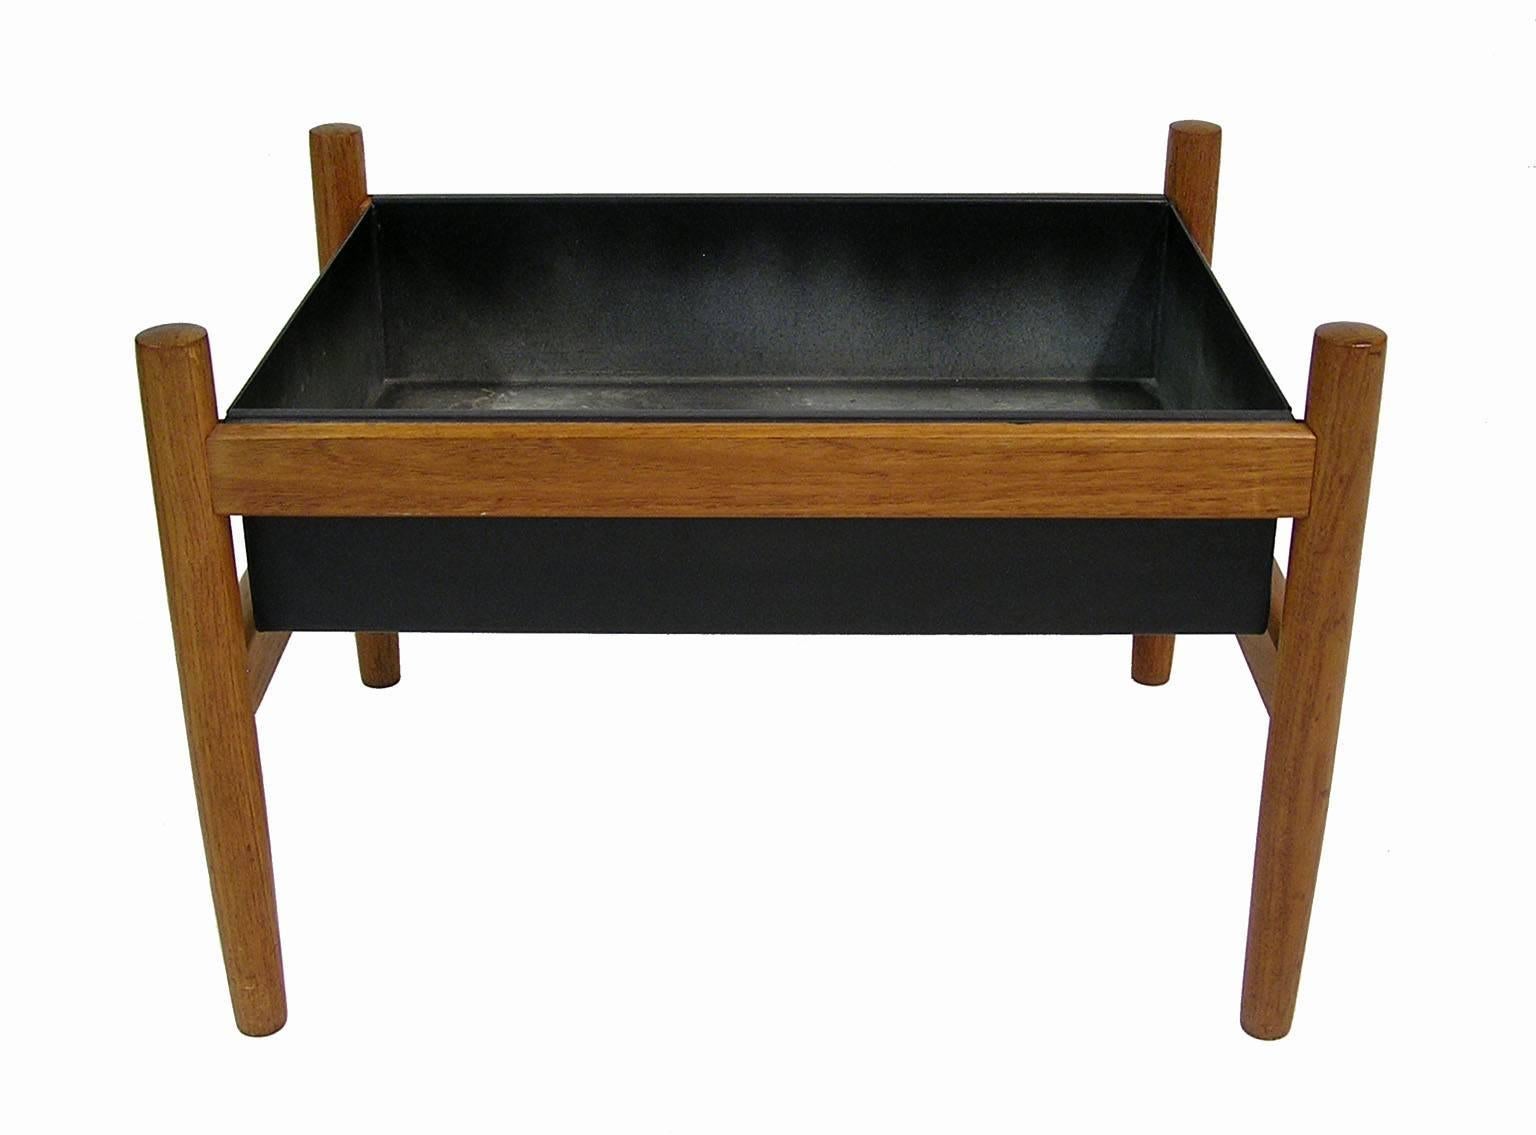 A small teak planter from the 1960s by Spøttrup of Denmark. Stylish Scandinavian Modern era lines with original black metal insert that slots comfortably into the solid teak frame. Has some light surface wear from use to the interior of the insert